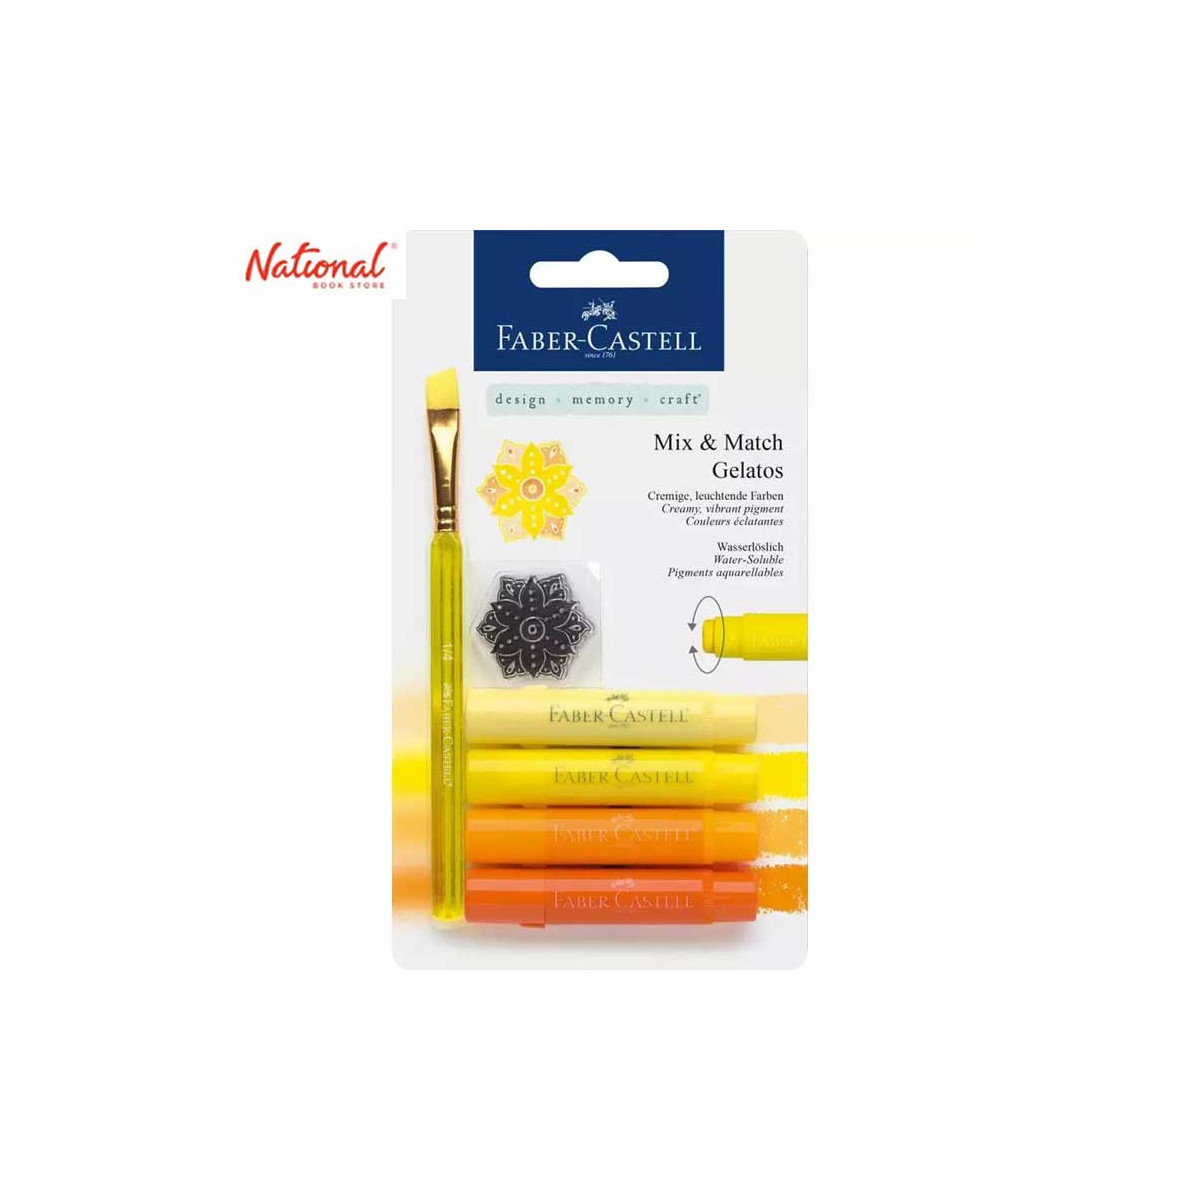 FABER-CASTELL WATERCOLOR CRAYON 121801 4 COLORS YELLOW GELATO